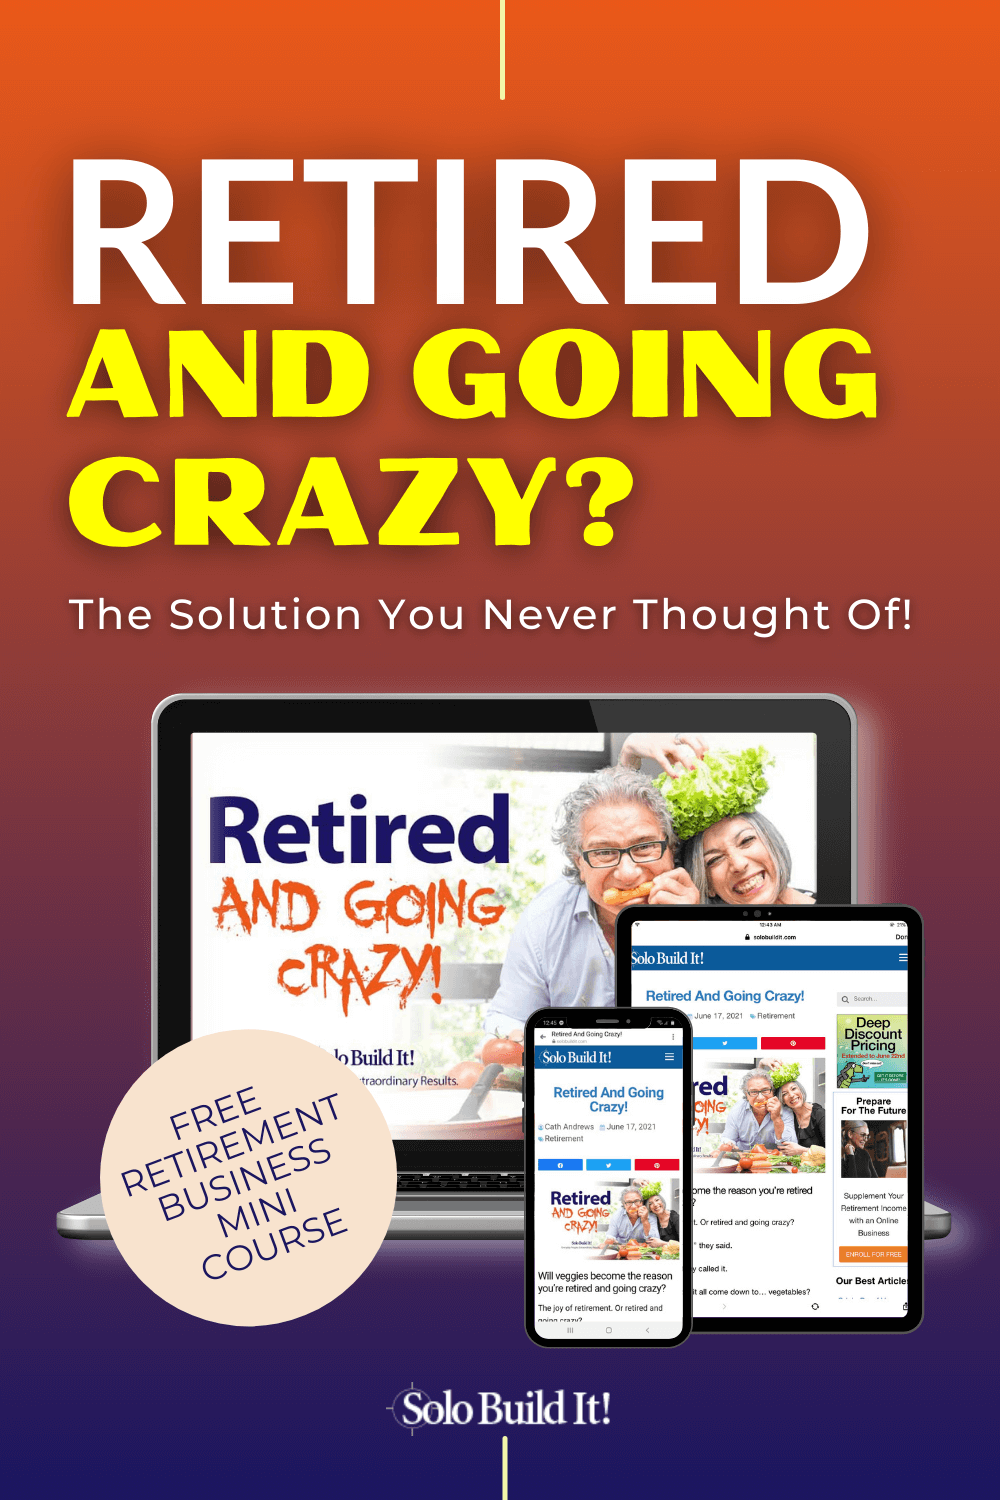 Retired And Going Crazy! Find New Purpose and Thrive